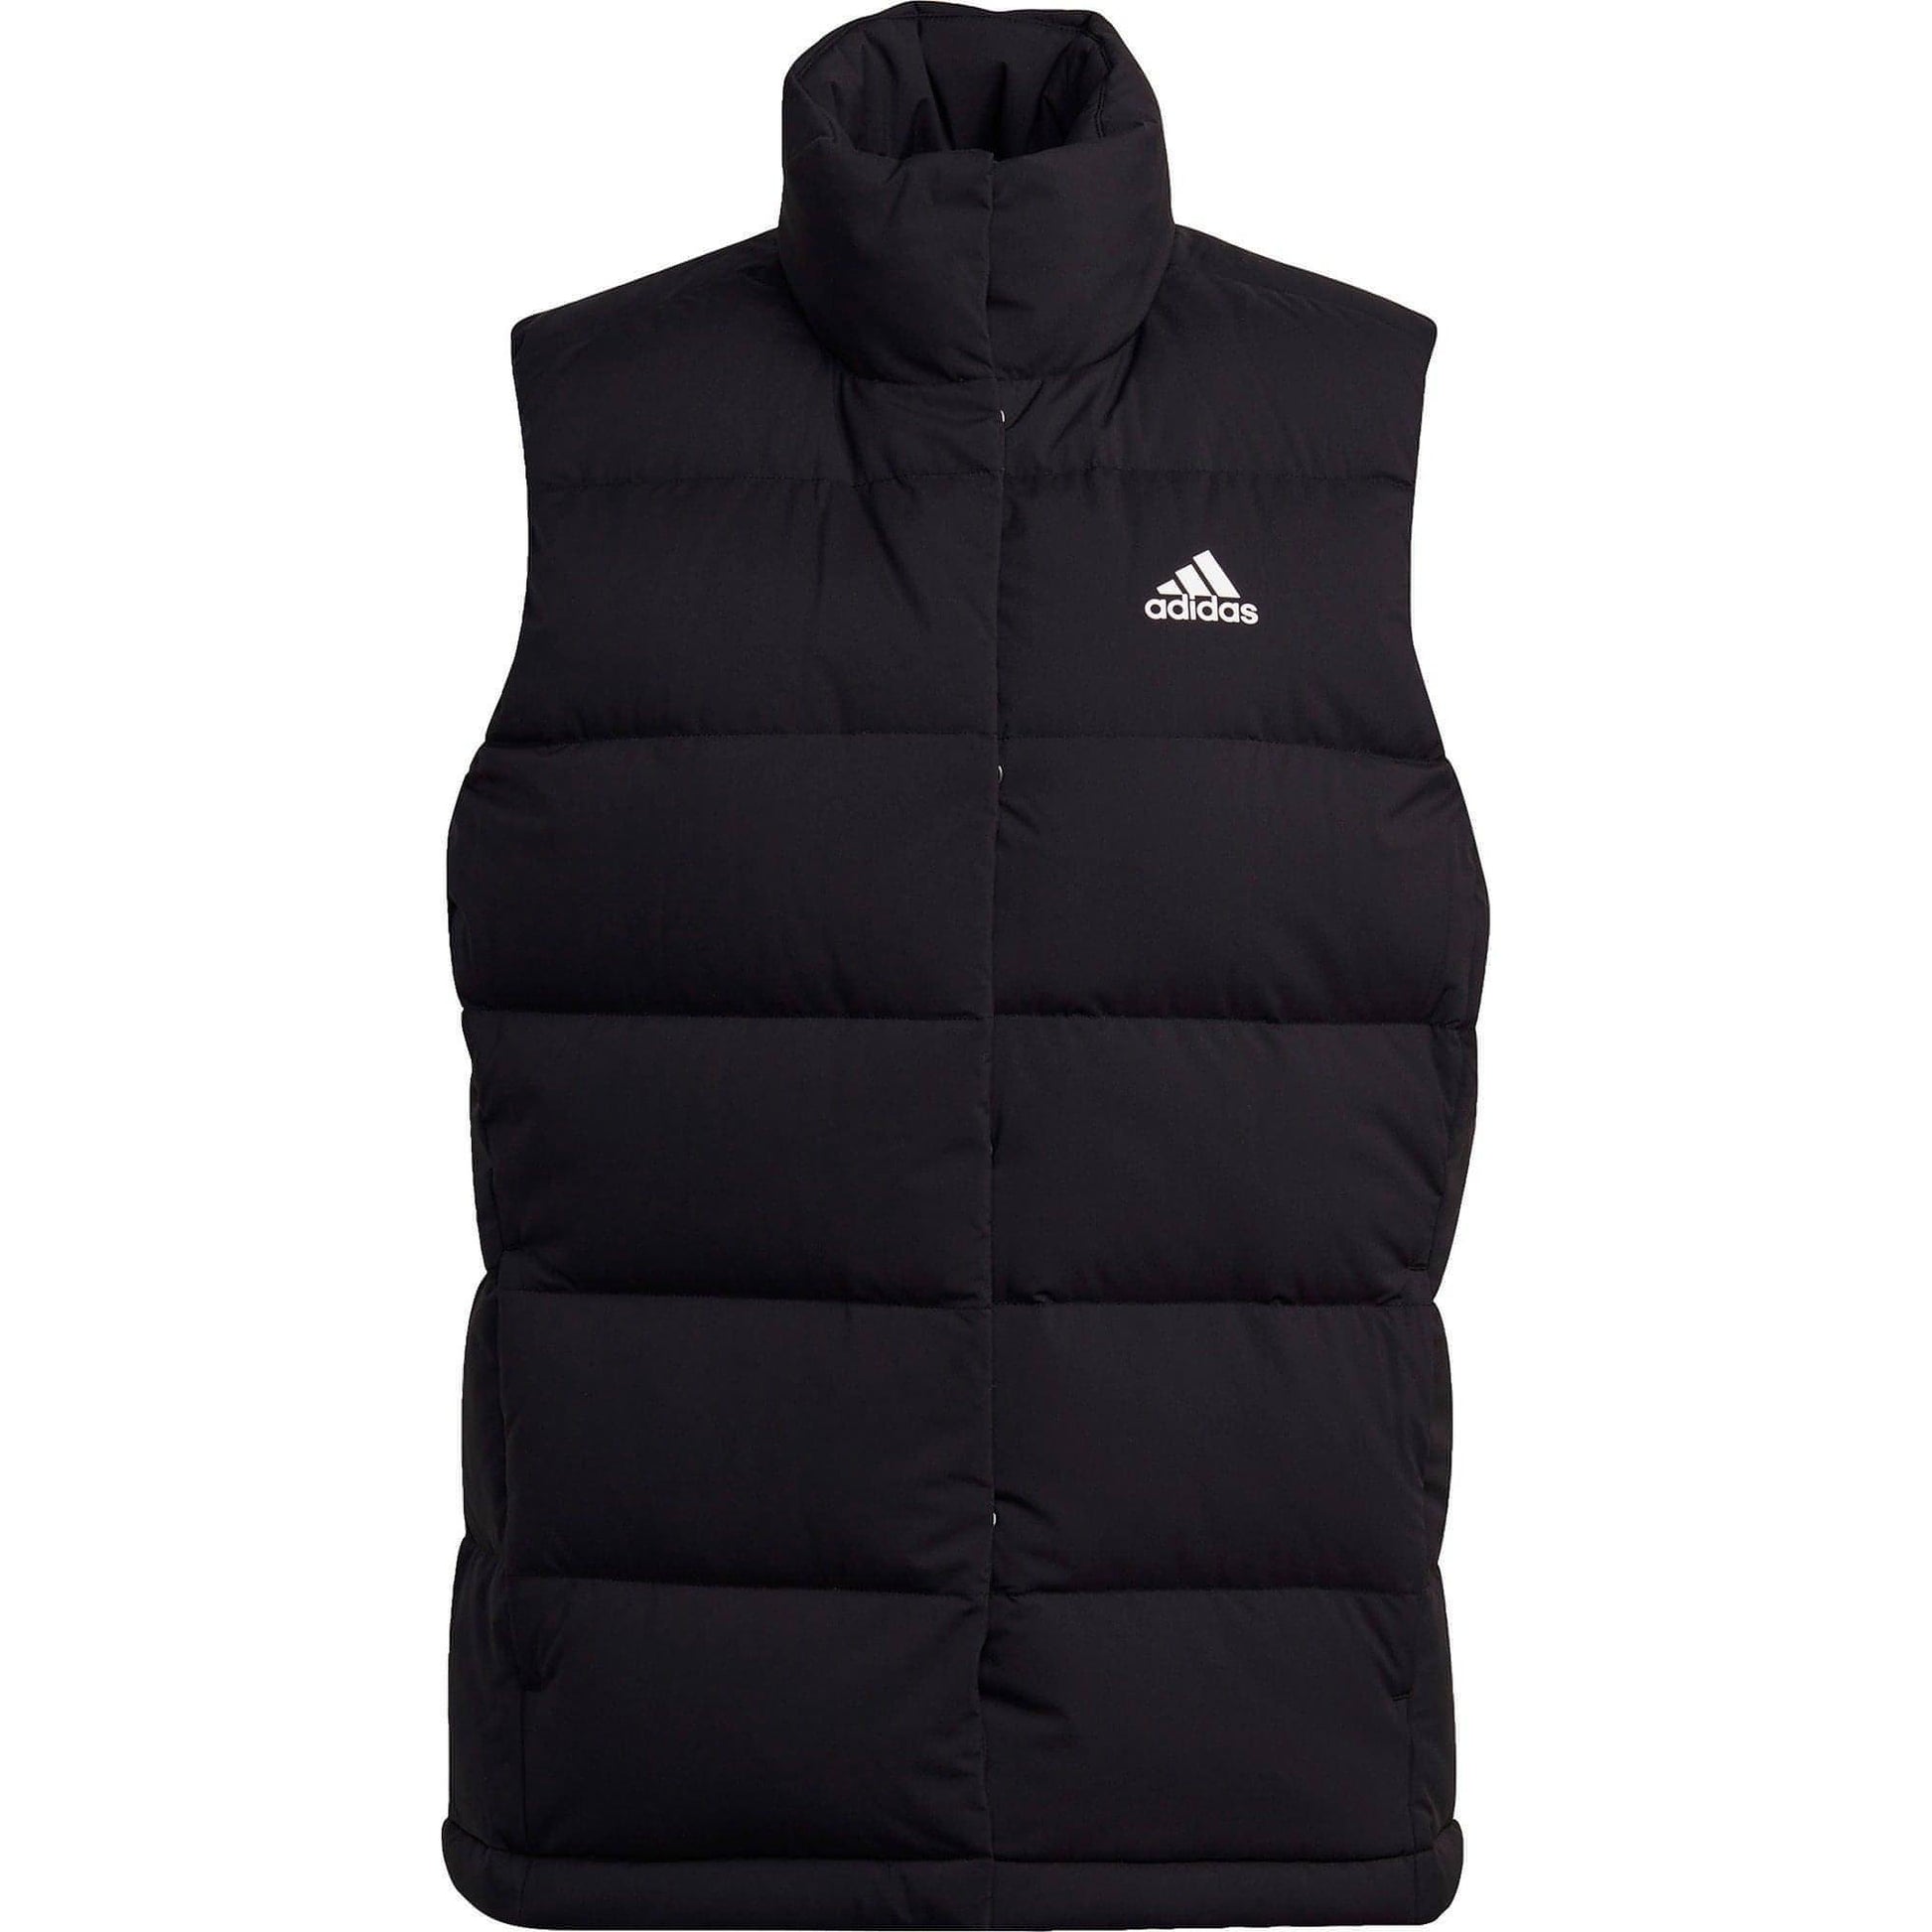 Adidas Helionic Down Gilet Hg6280 Front - Front View